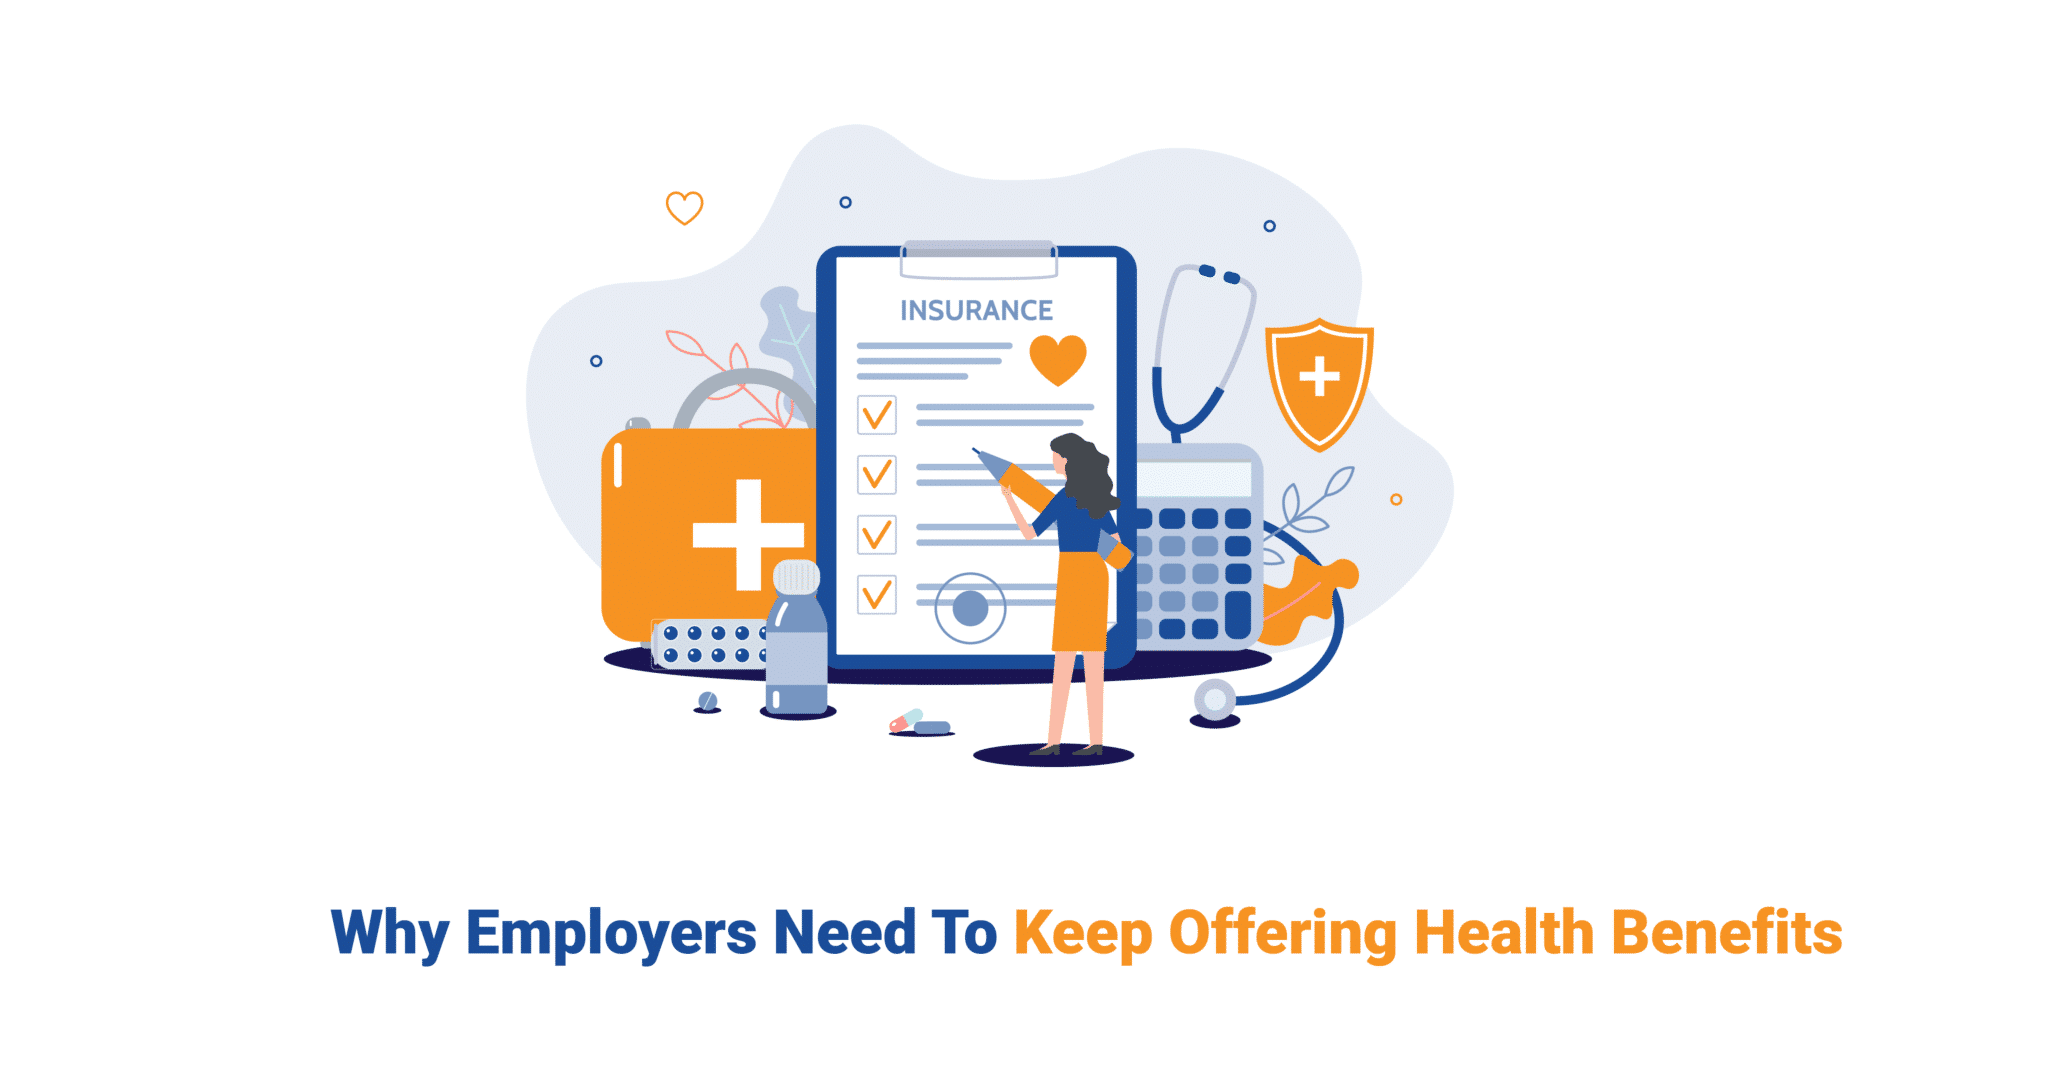 Why Employers Need to Keep Offering Health Benefits